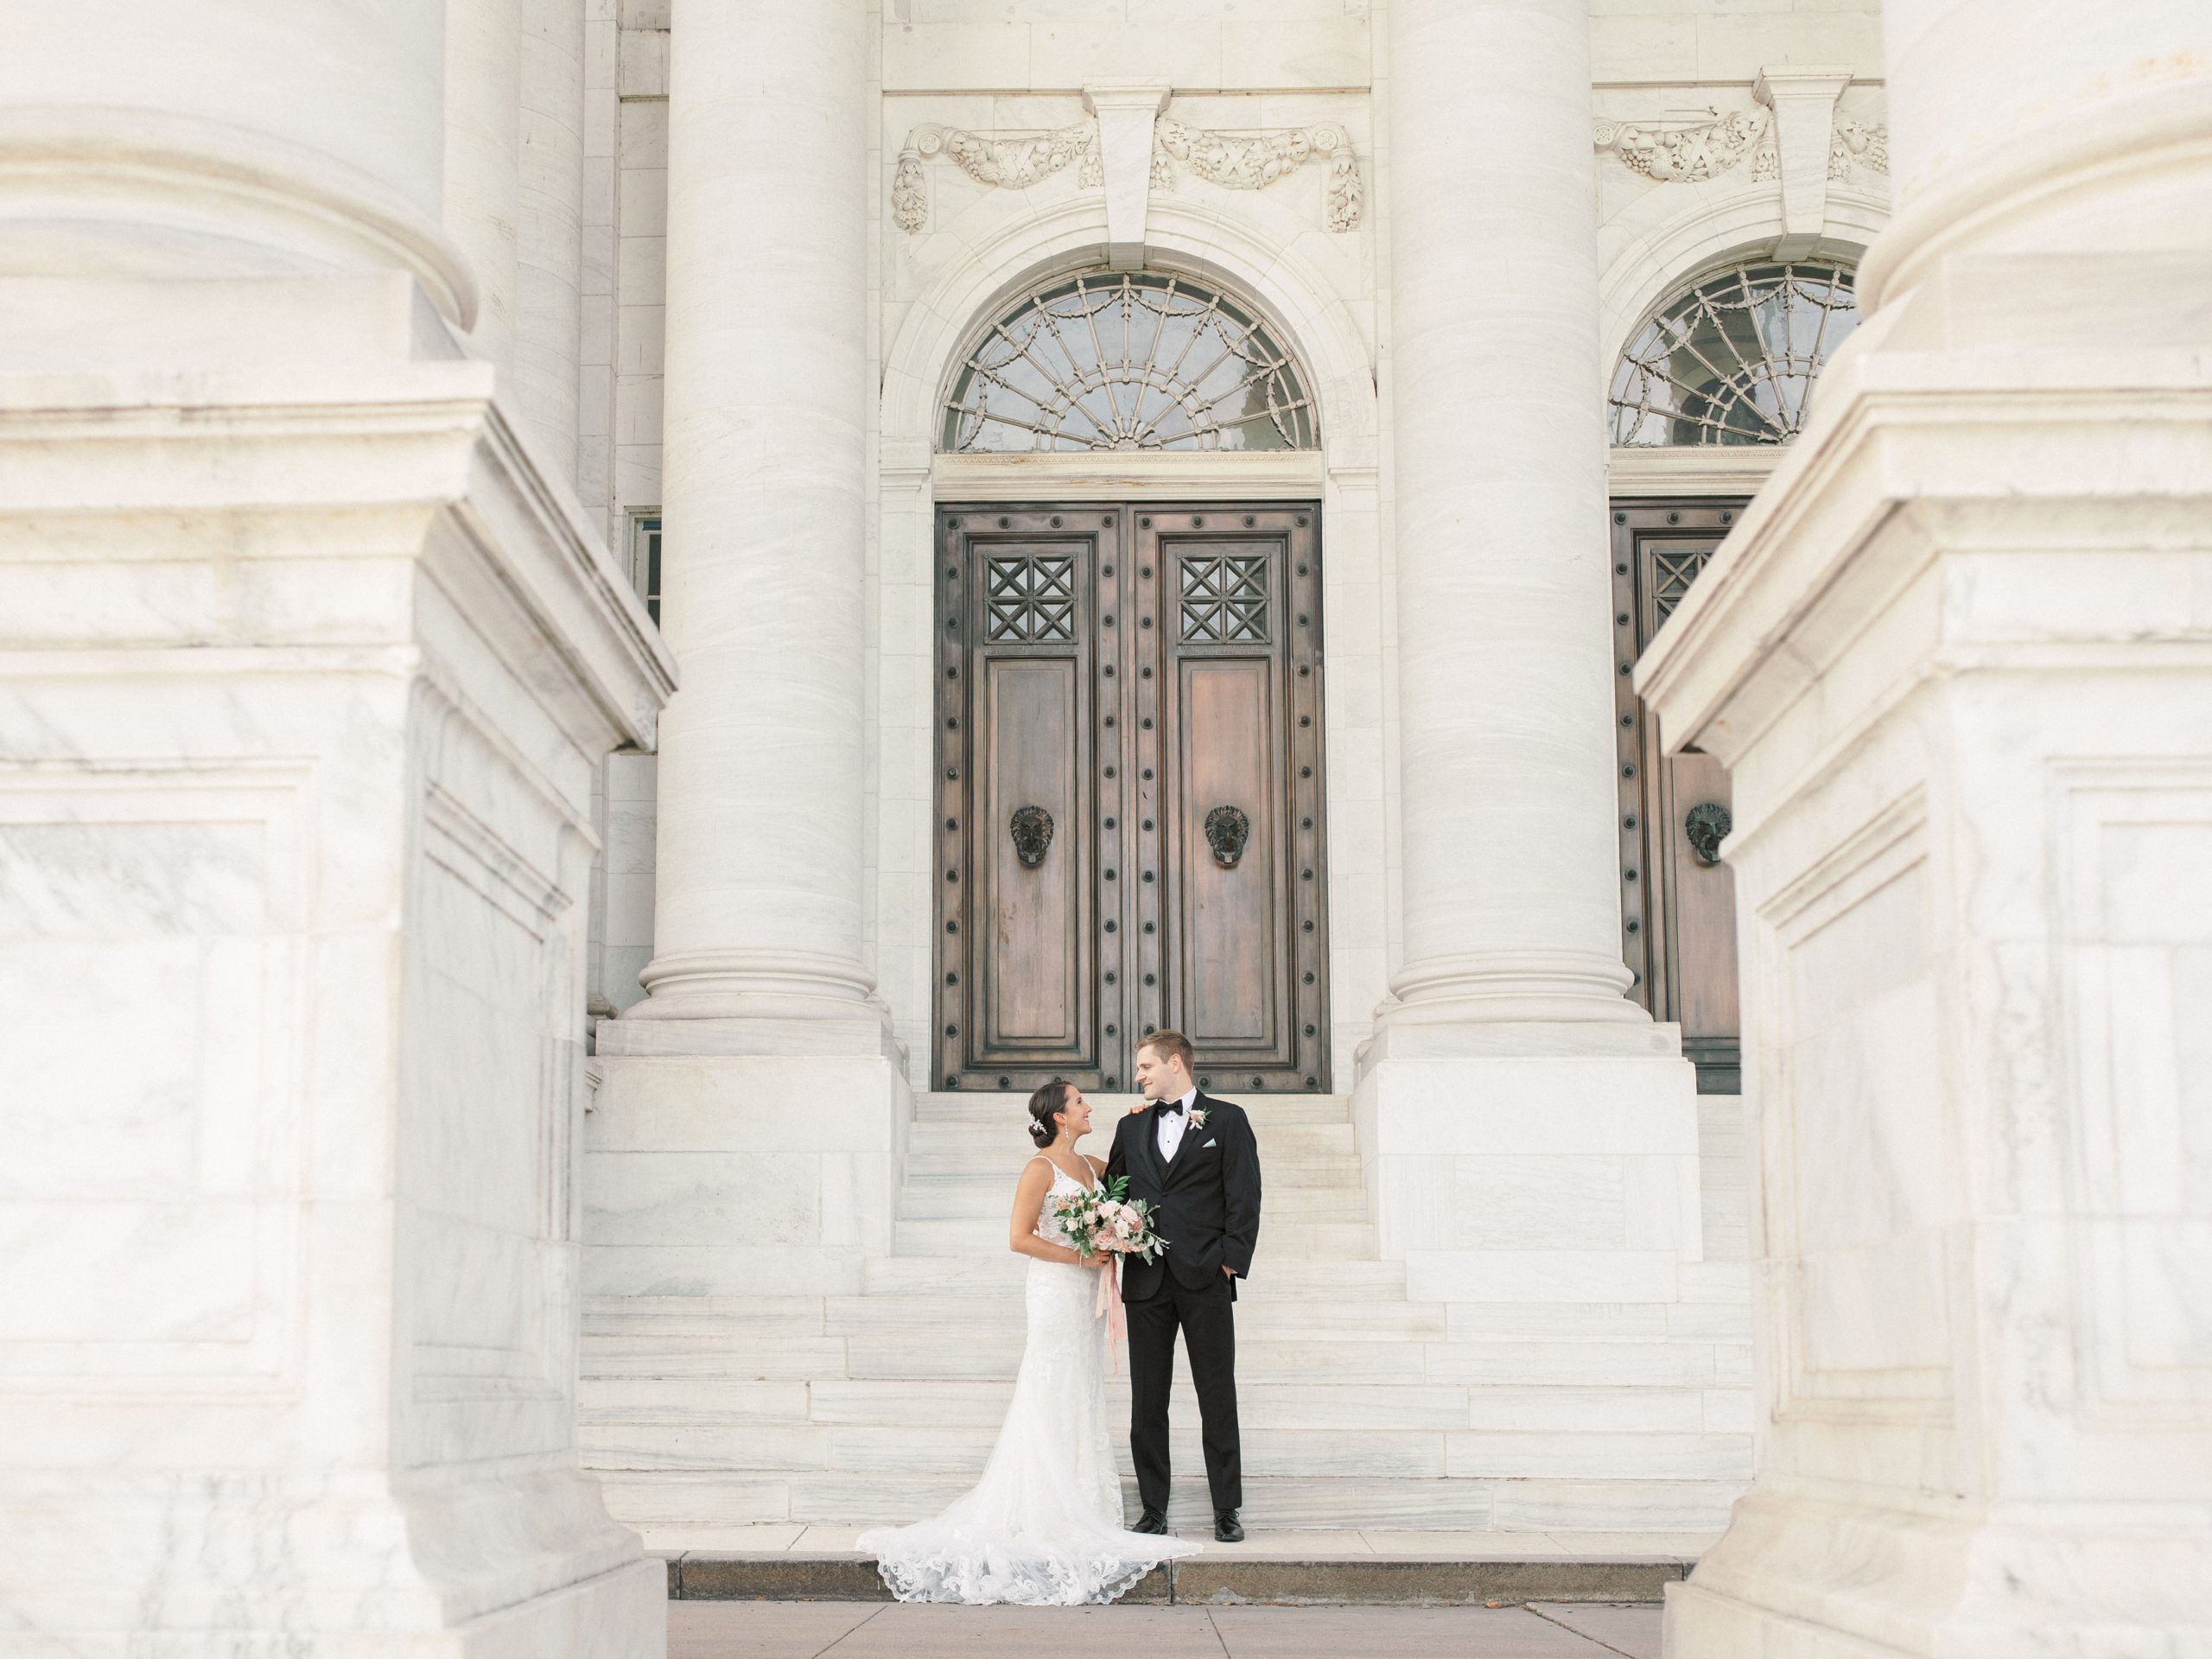 An elegant black-tie wedding at DAR Constitution Hall in Washington, DC. Photographed by DC wedding photographer, Alicia Lacey.